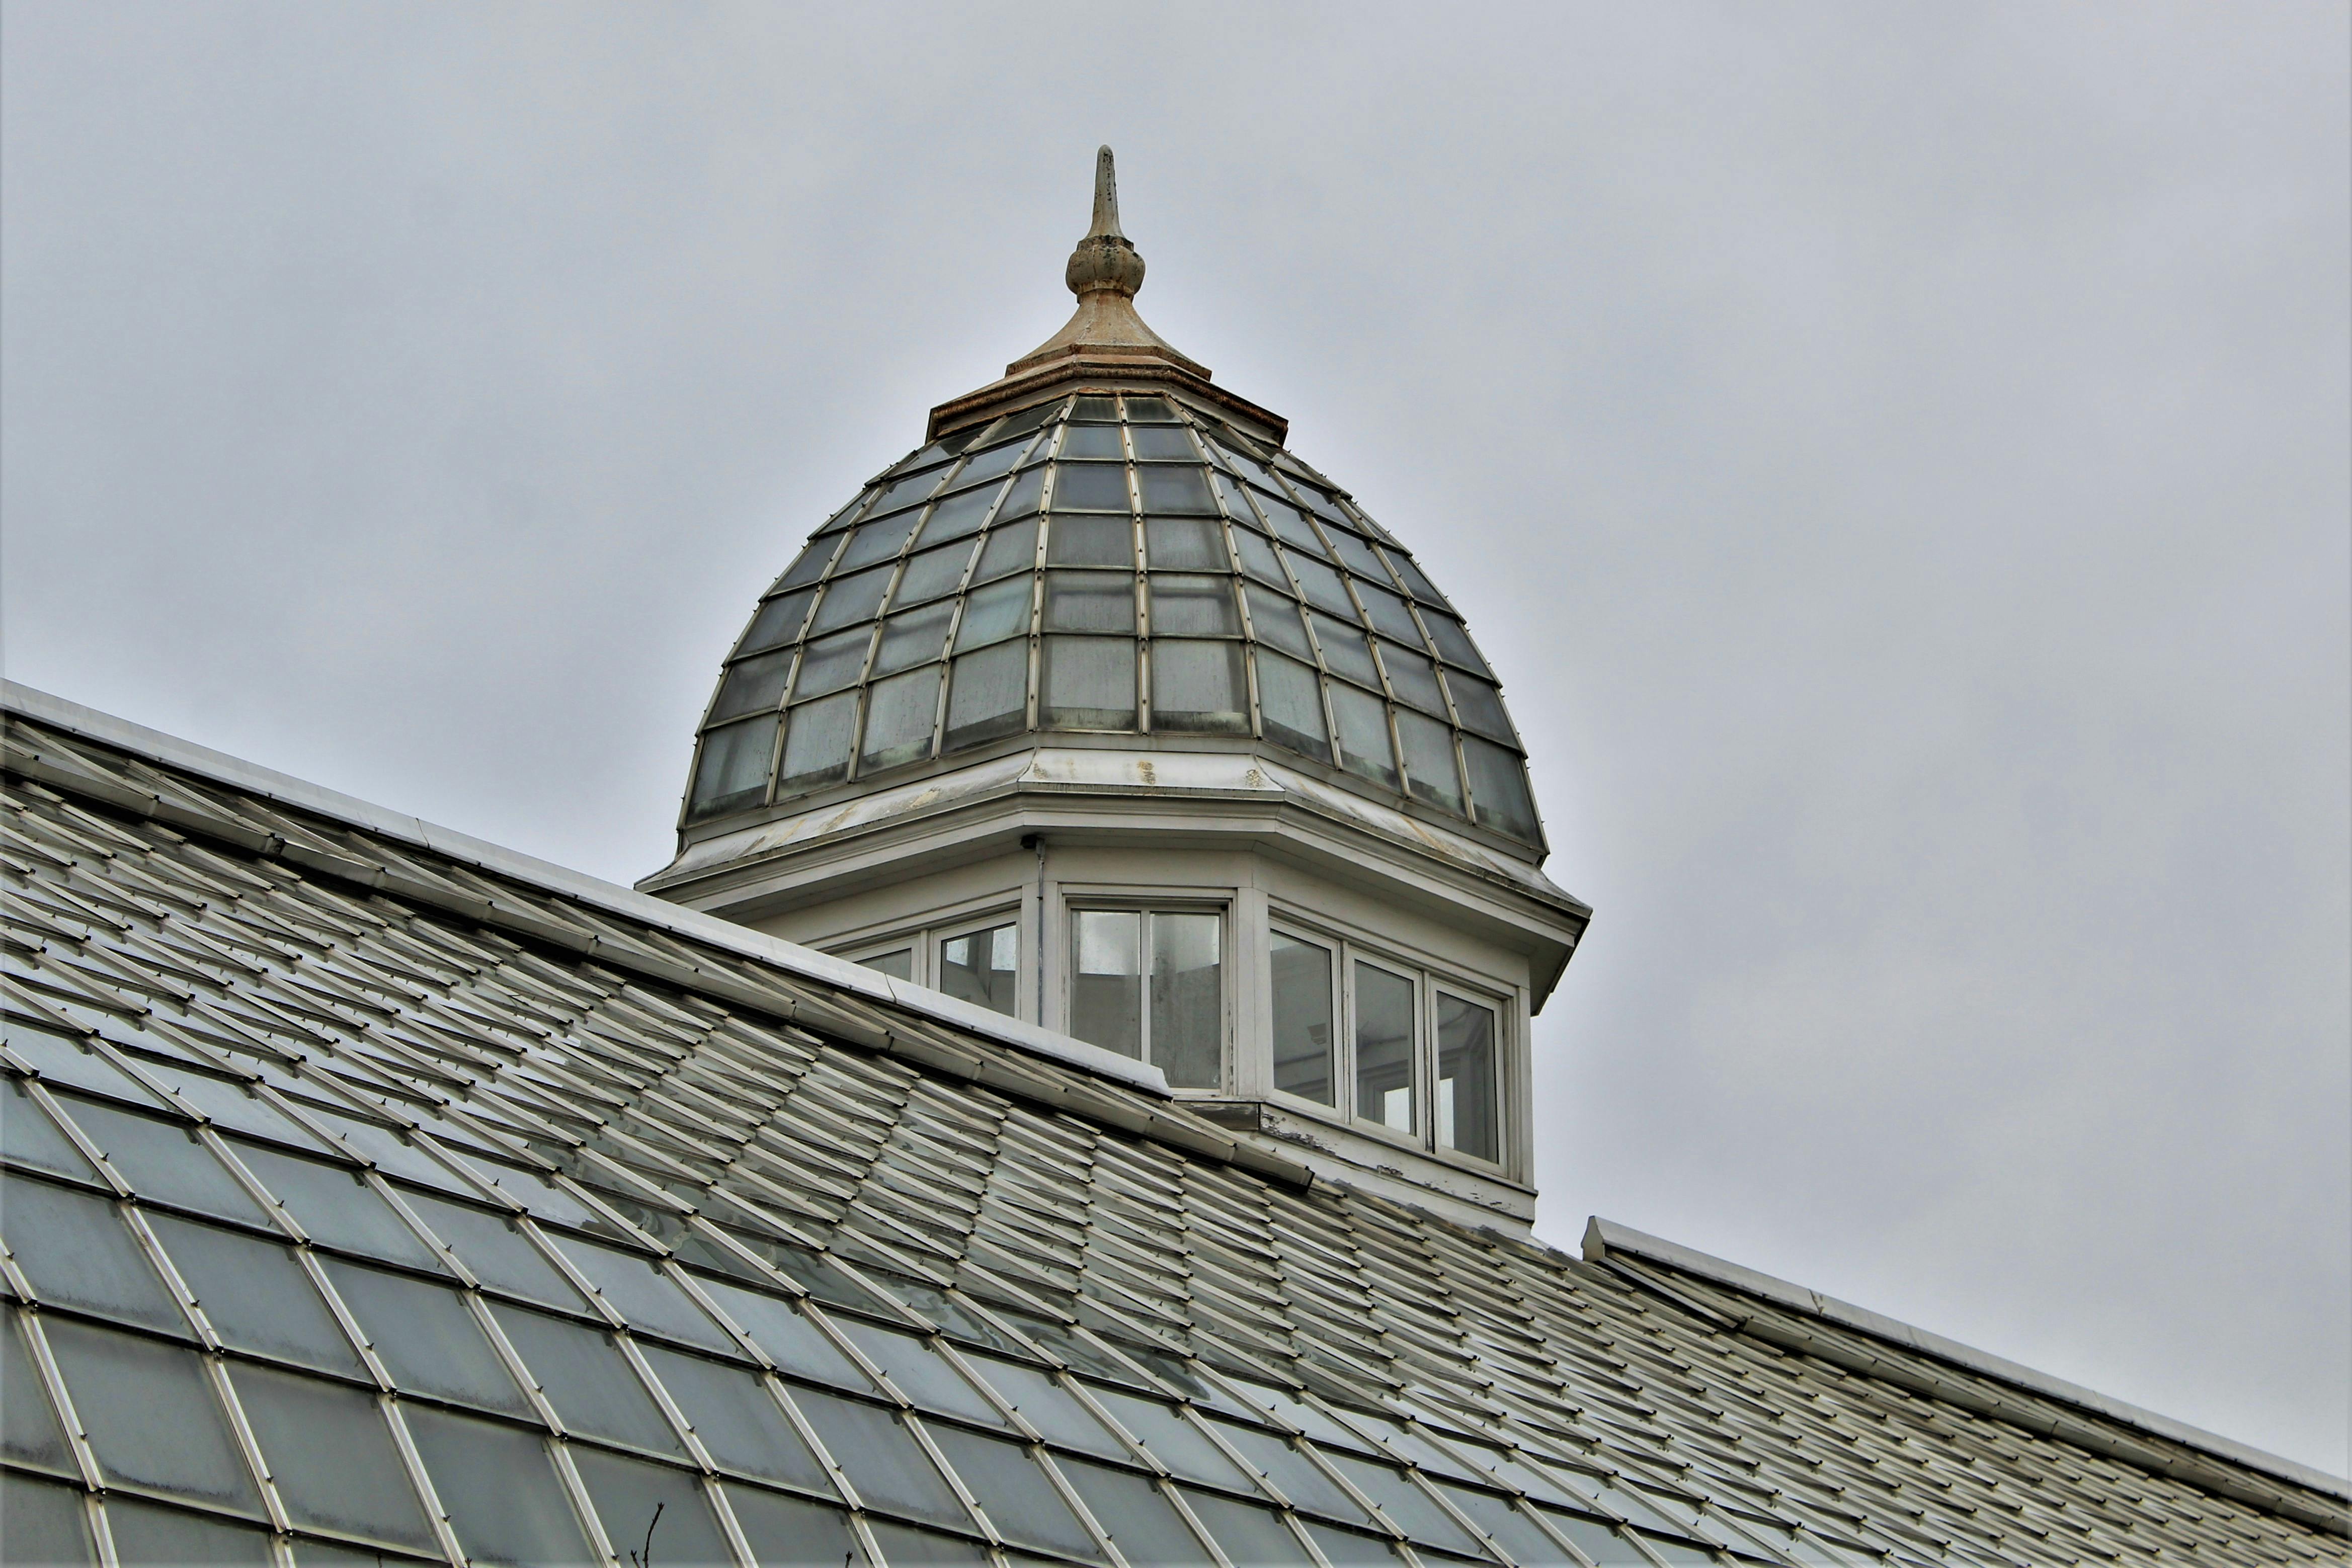 glass dome roof